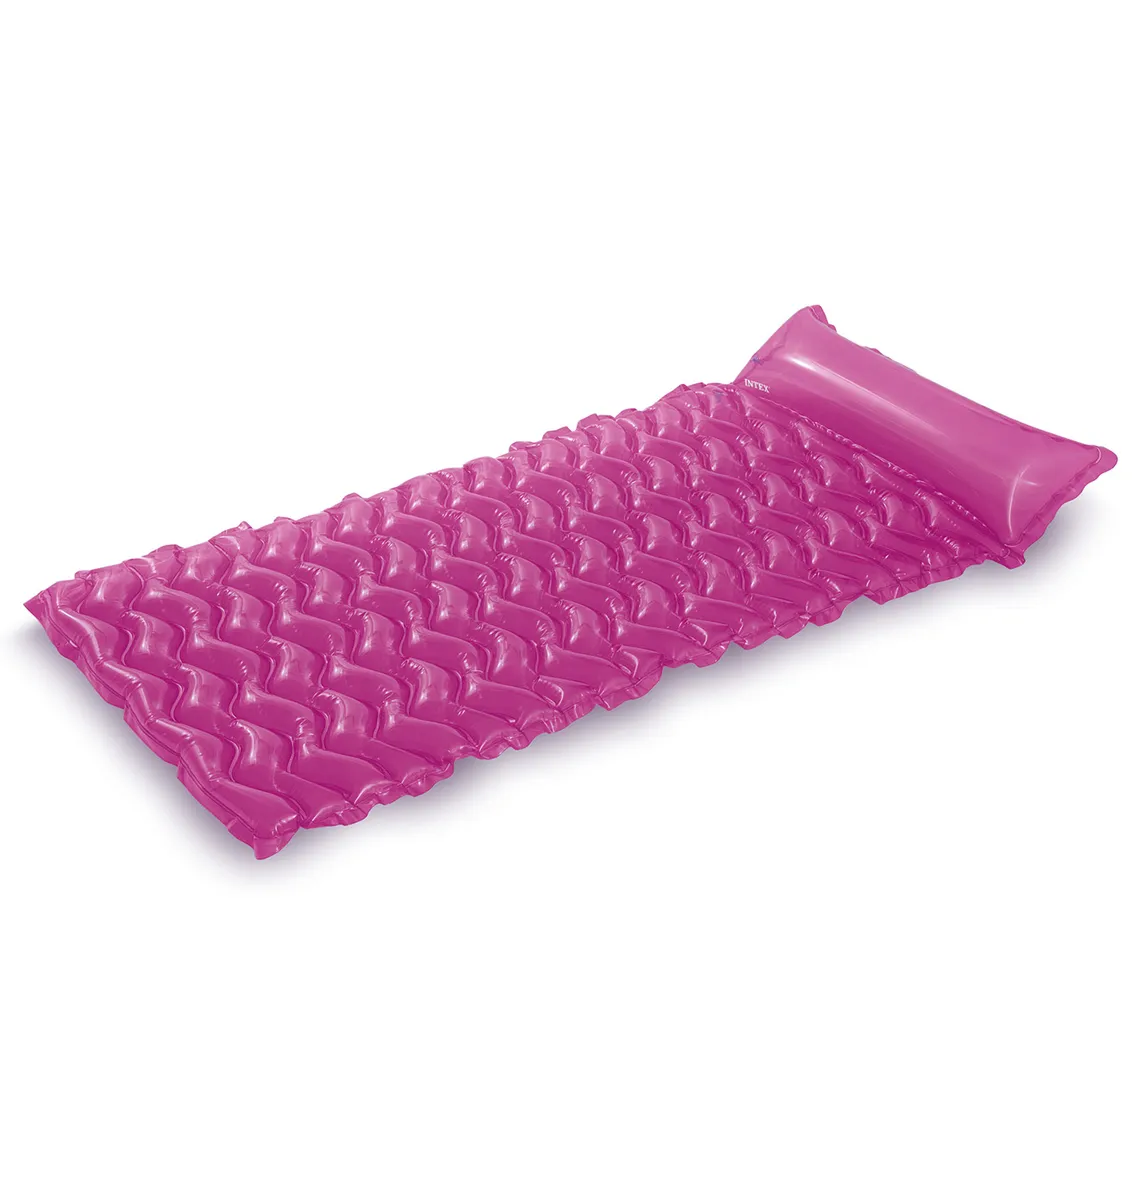 MATELAS GONFLABLE A ROULER NEON FROST